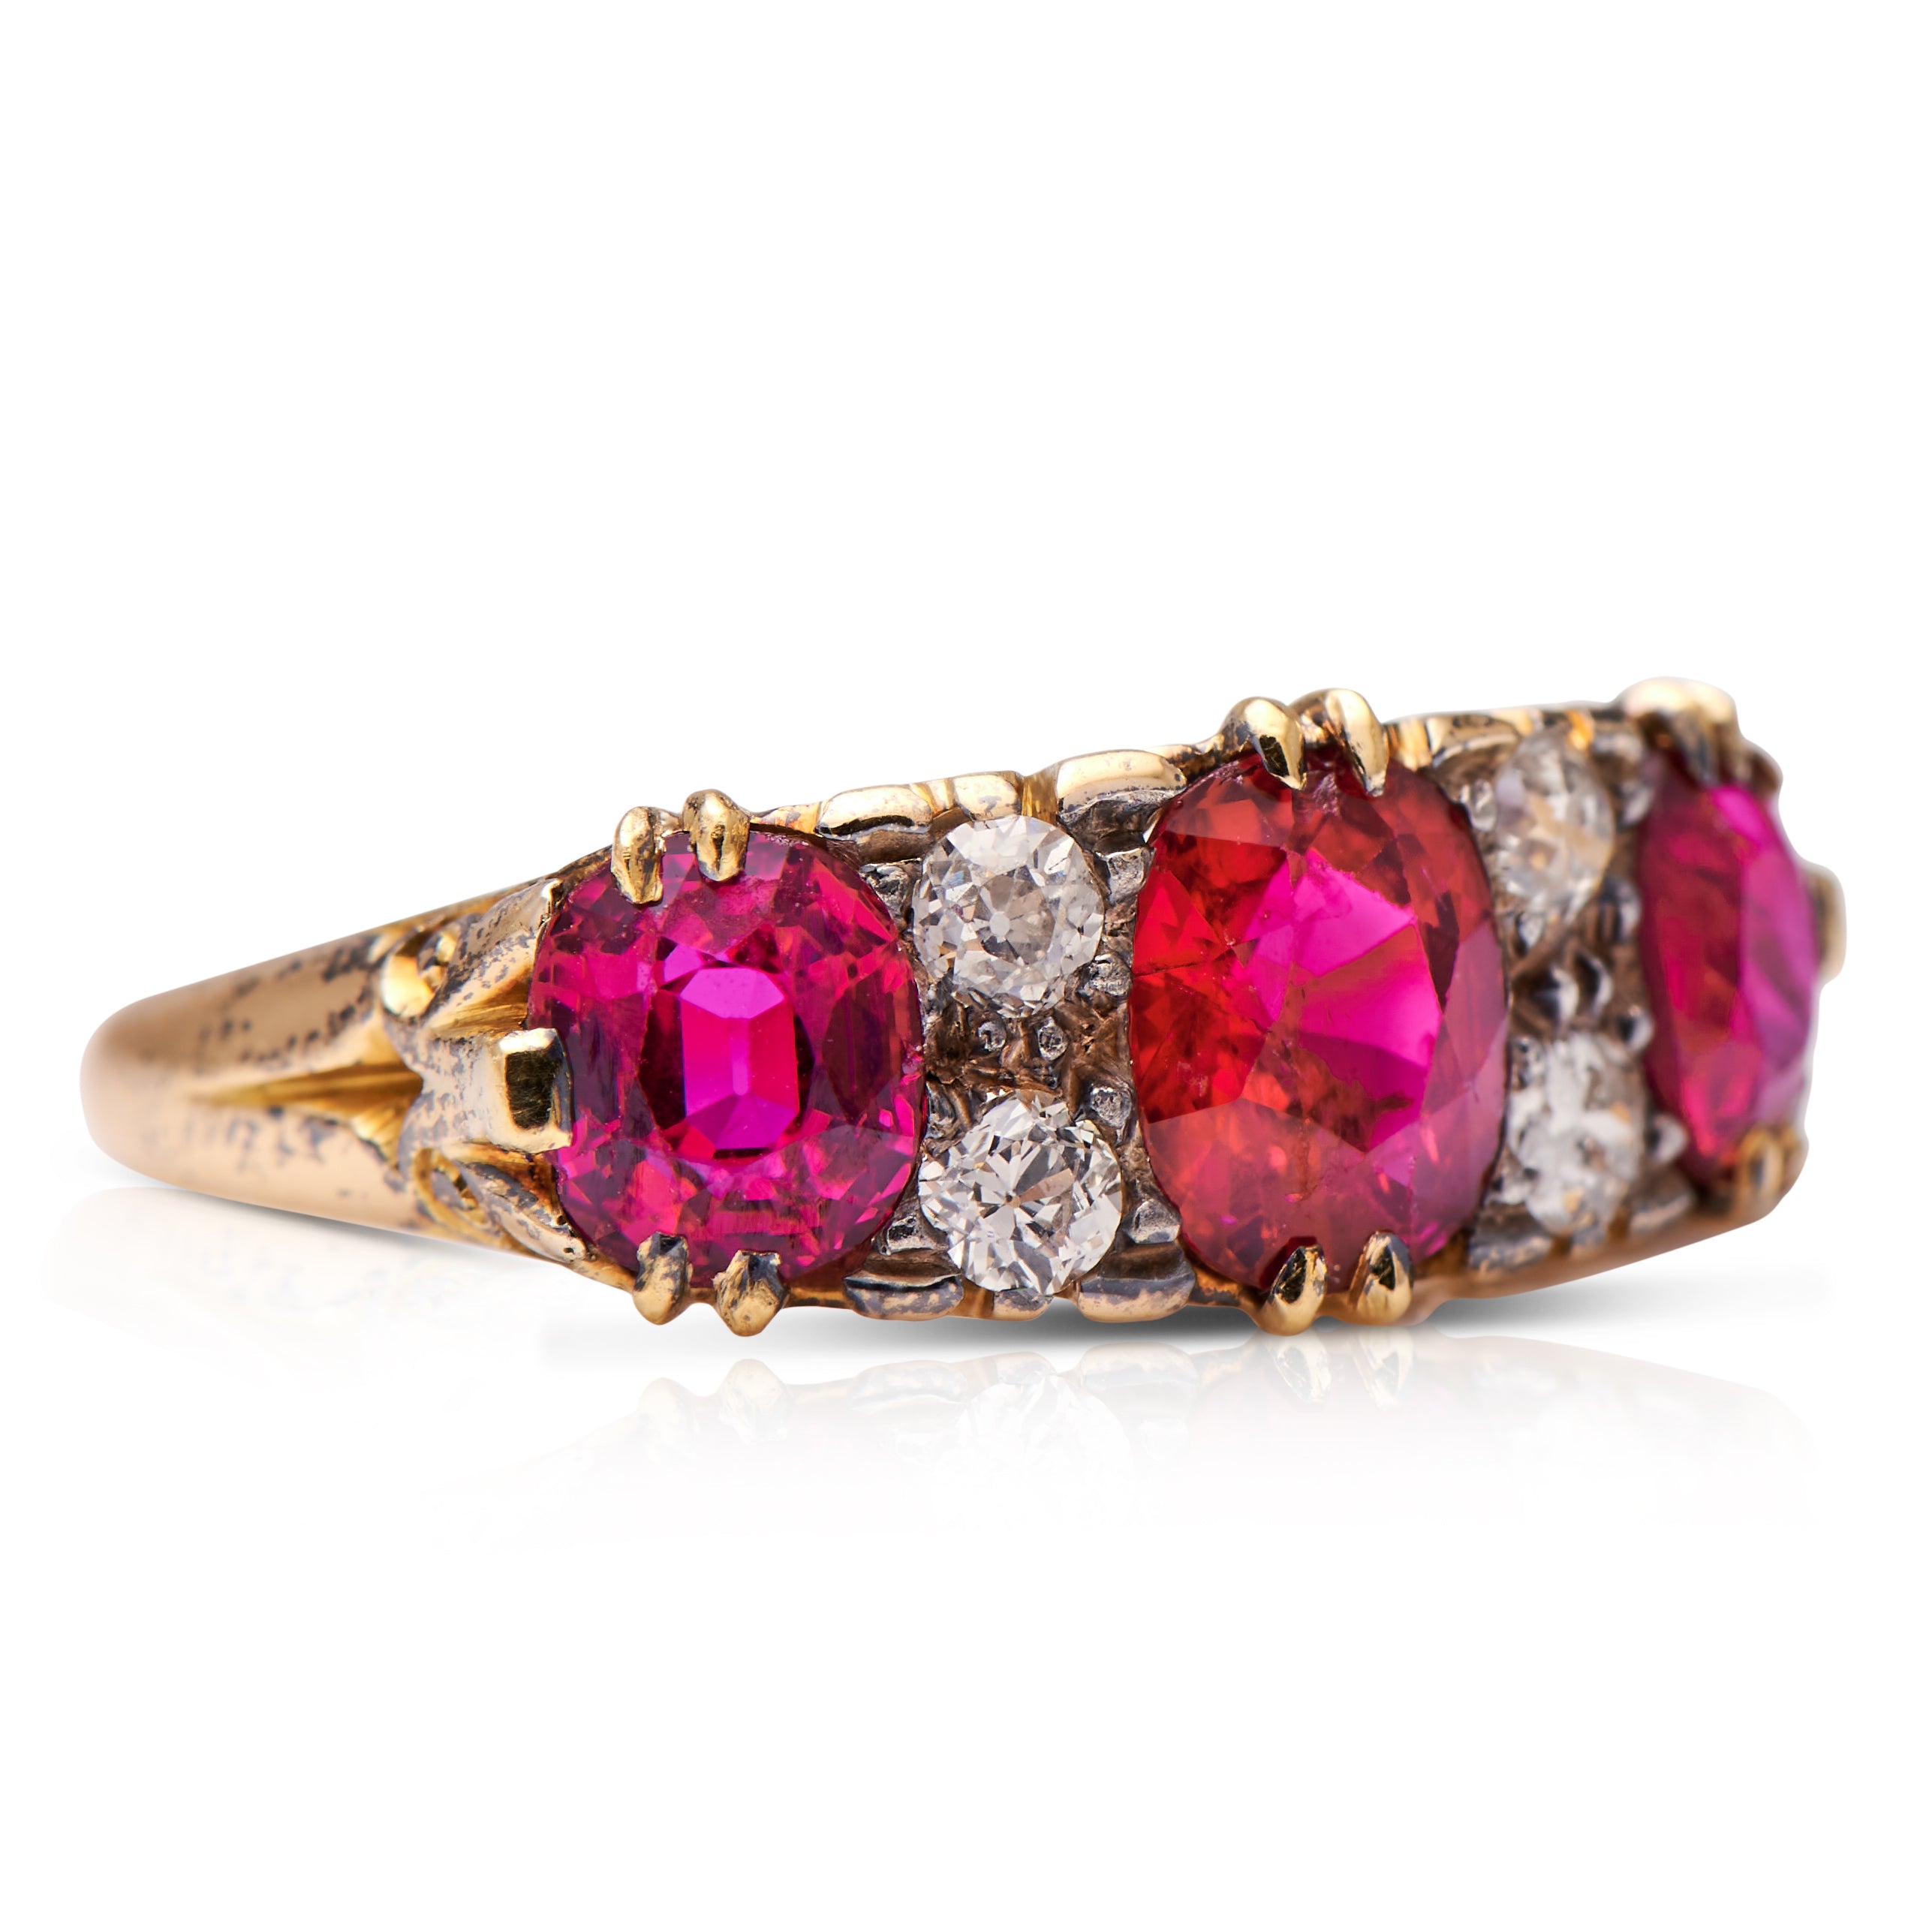 Sold at Auction: 2547, ZALES RUBY AND DIAMOND STERLING RING